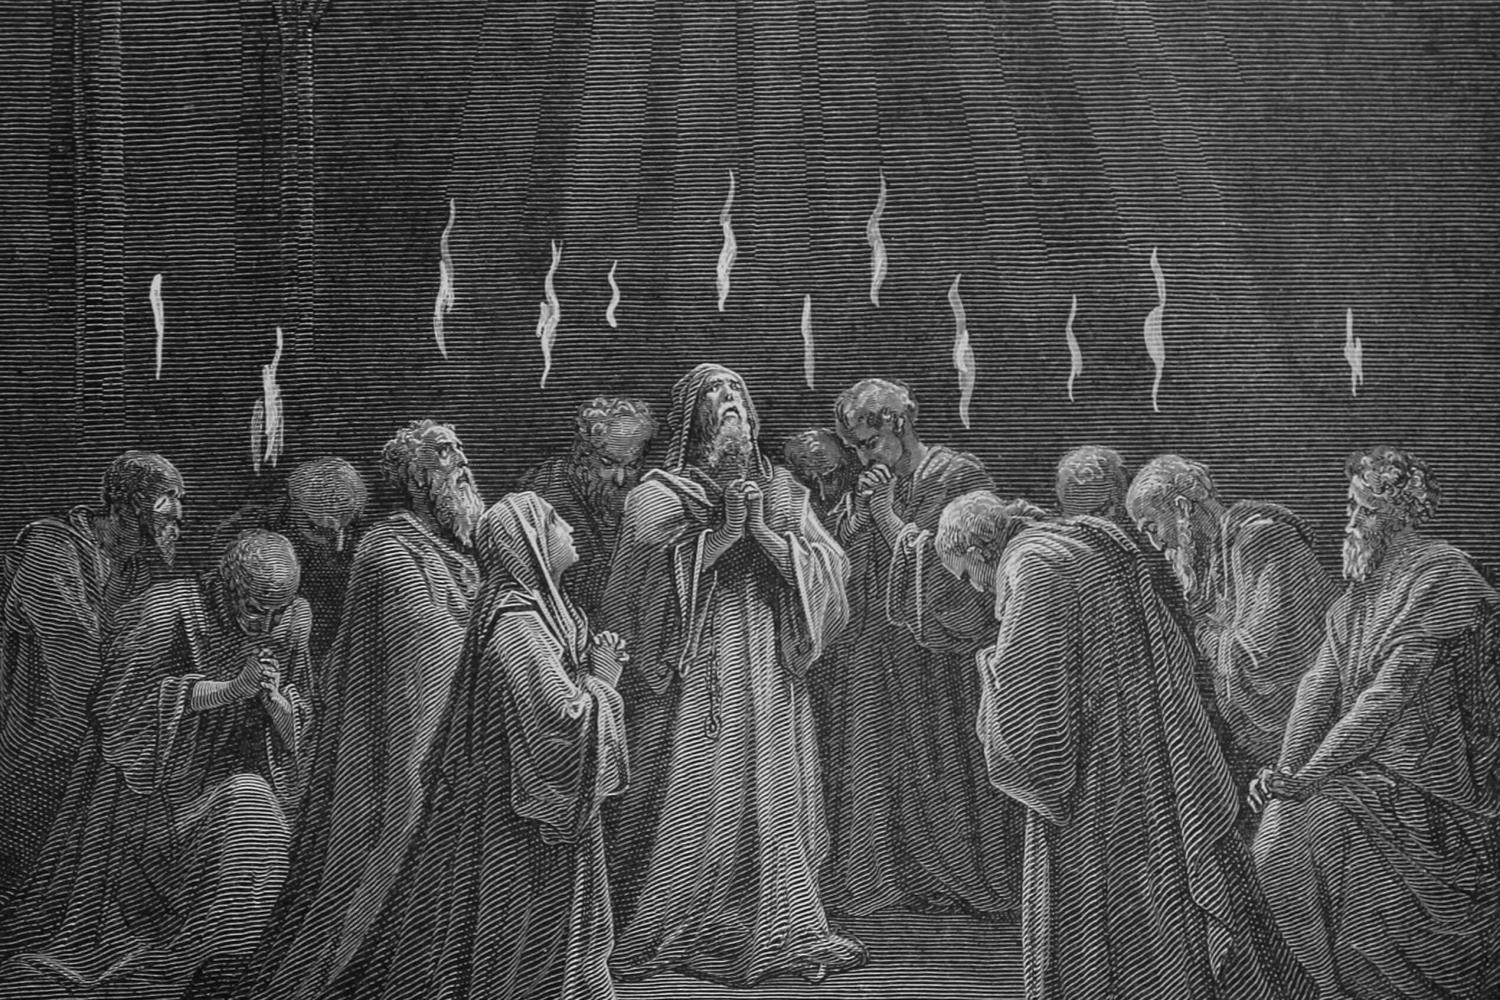 Gustave Dore's "The Descent of the Spirit"